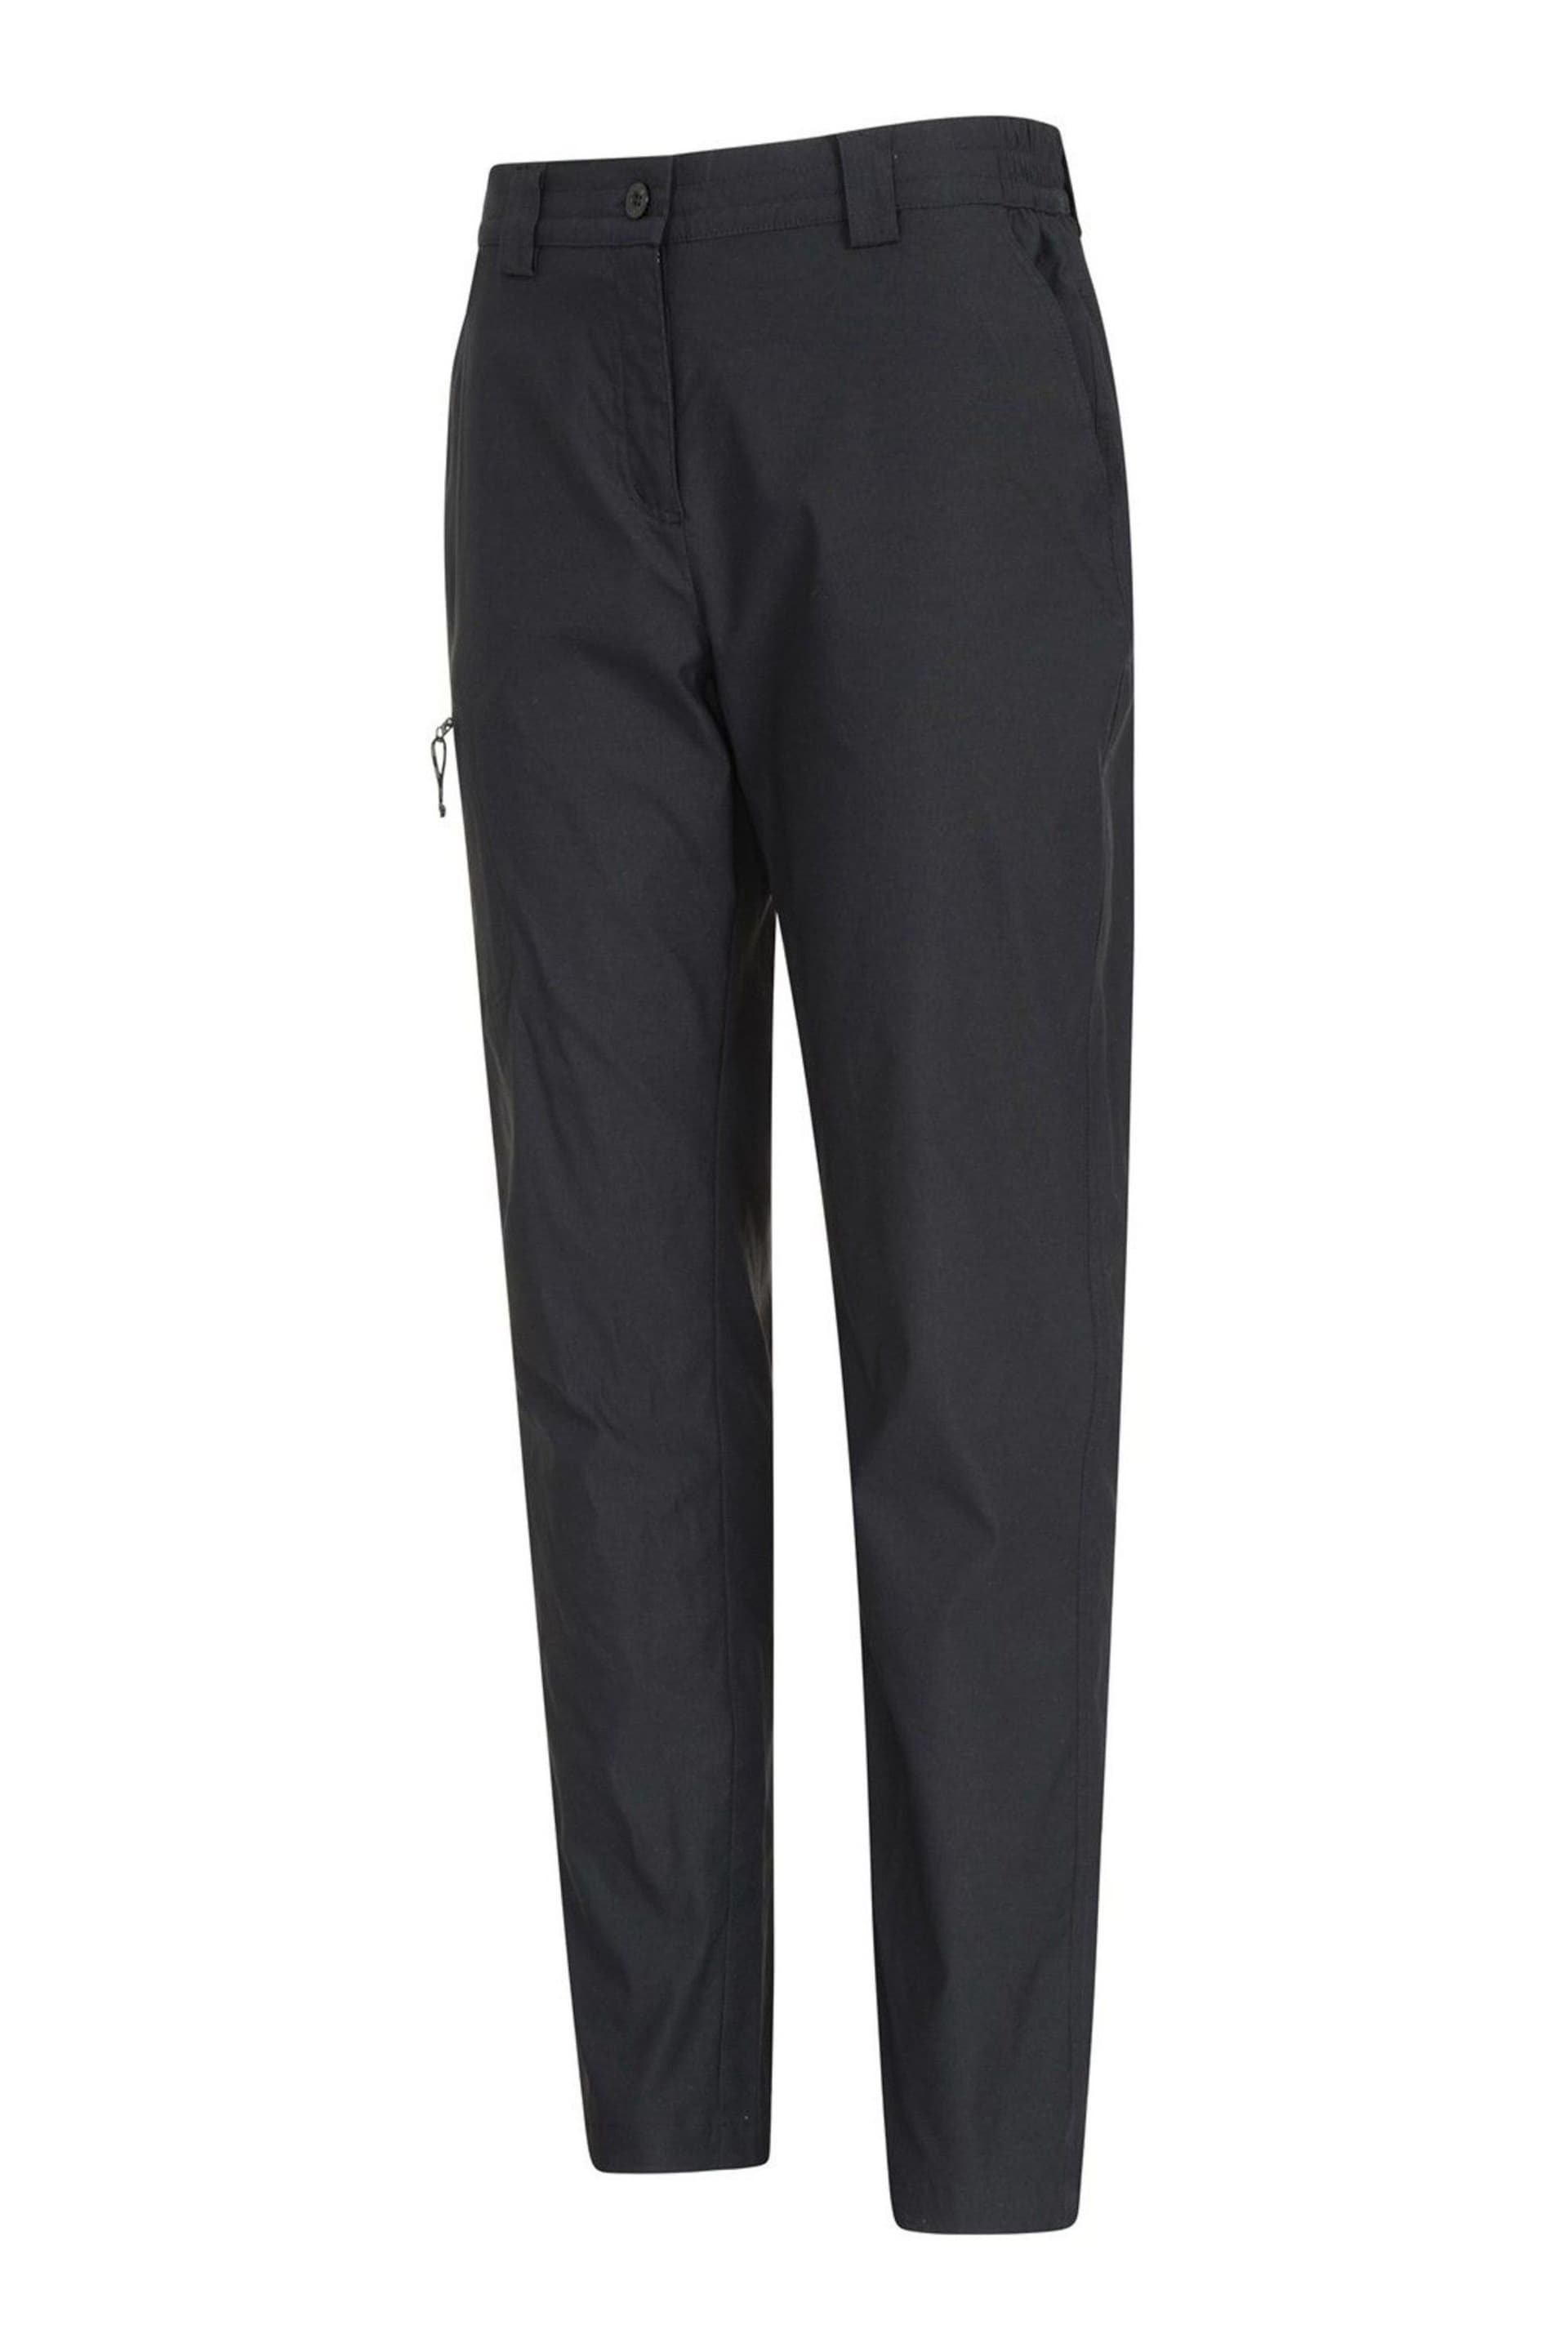 Mountain Warehouse Black Womens Hiker Lightweight Stretch UV Protect Walking Trousers - Image 3 of 4